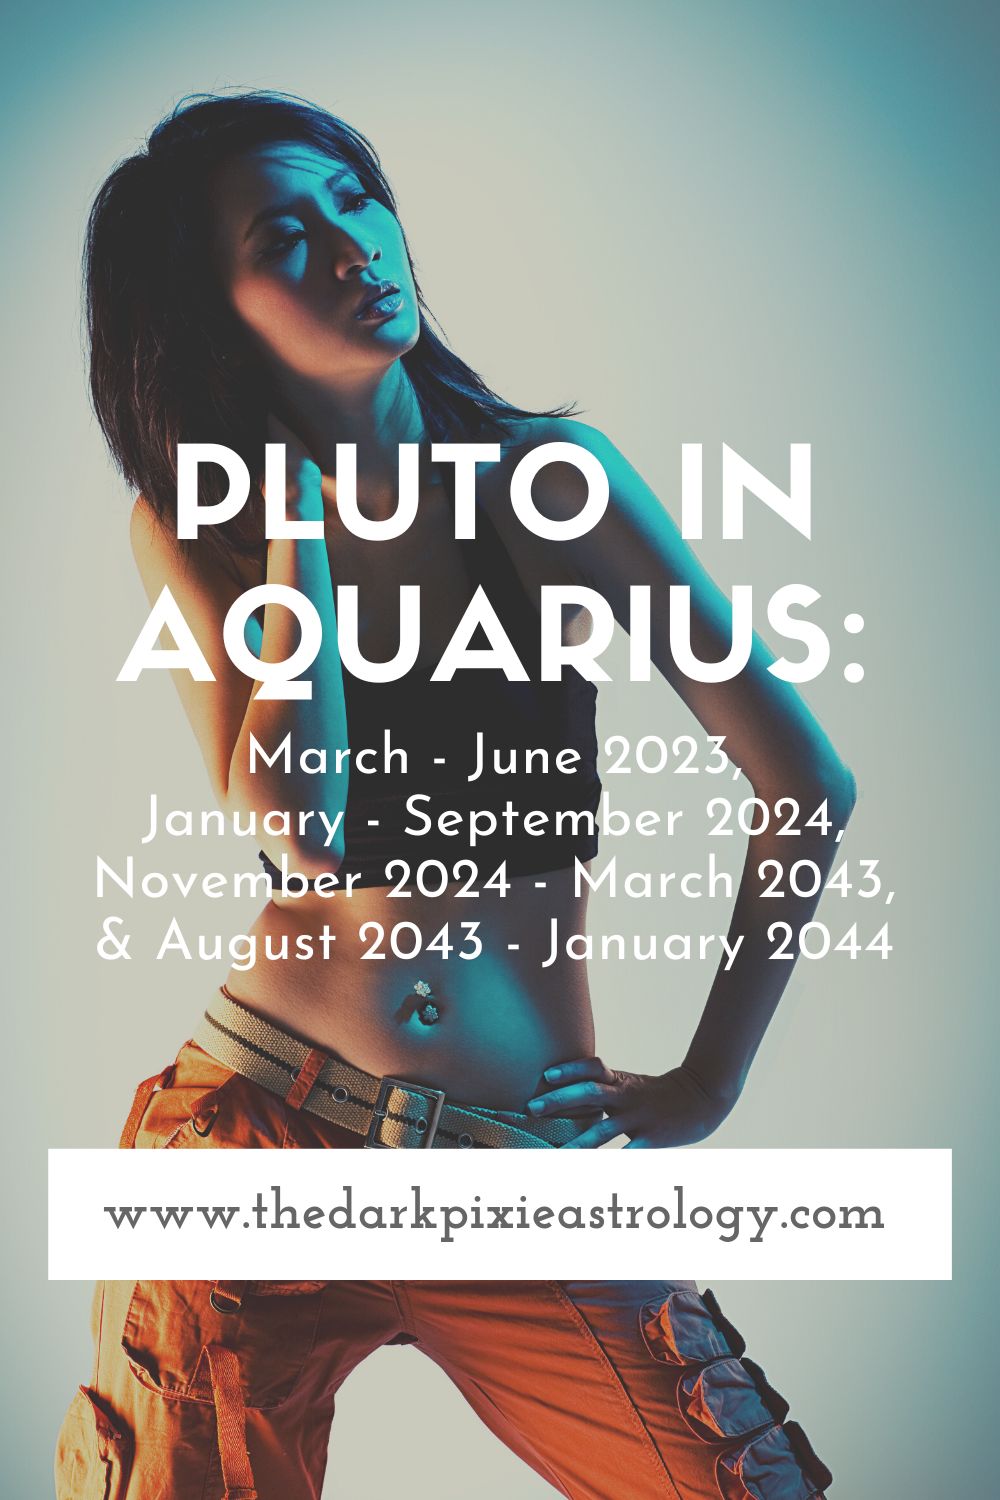 Pluto in Aquarius: March - June 2023, January - September 2024, November 2024 - March 2043, & August 2043 - January 2044 - The Dark Pixie Astrology